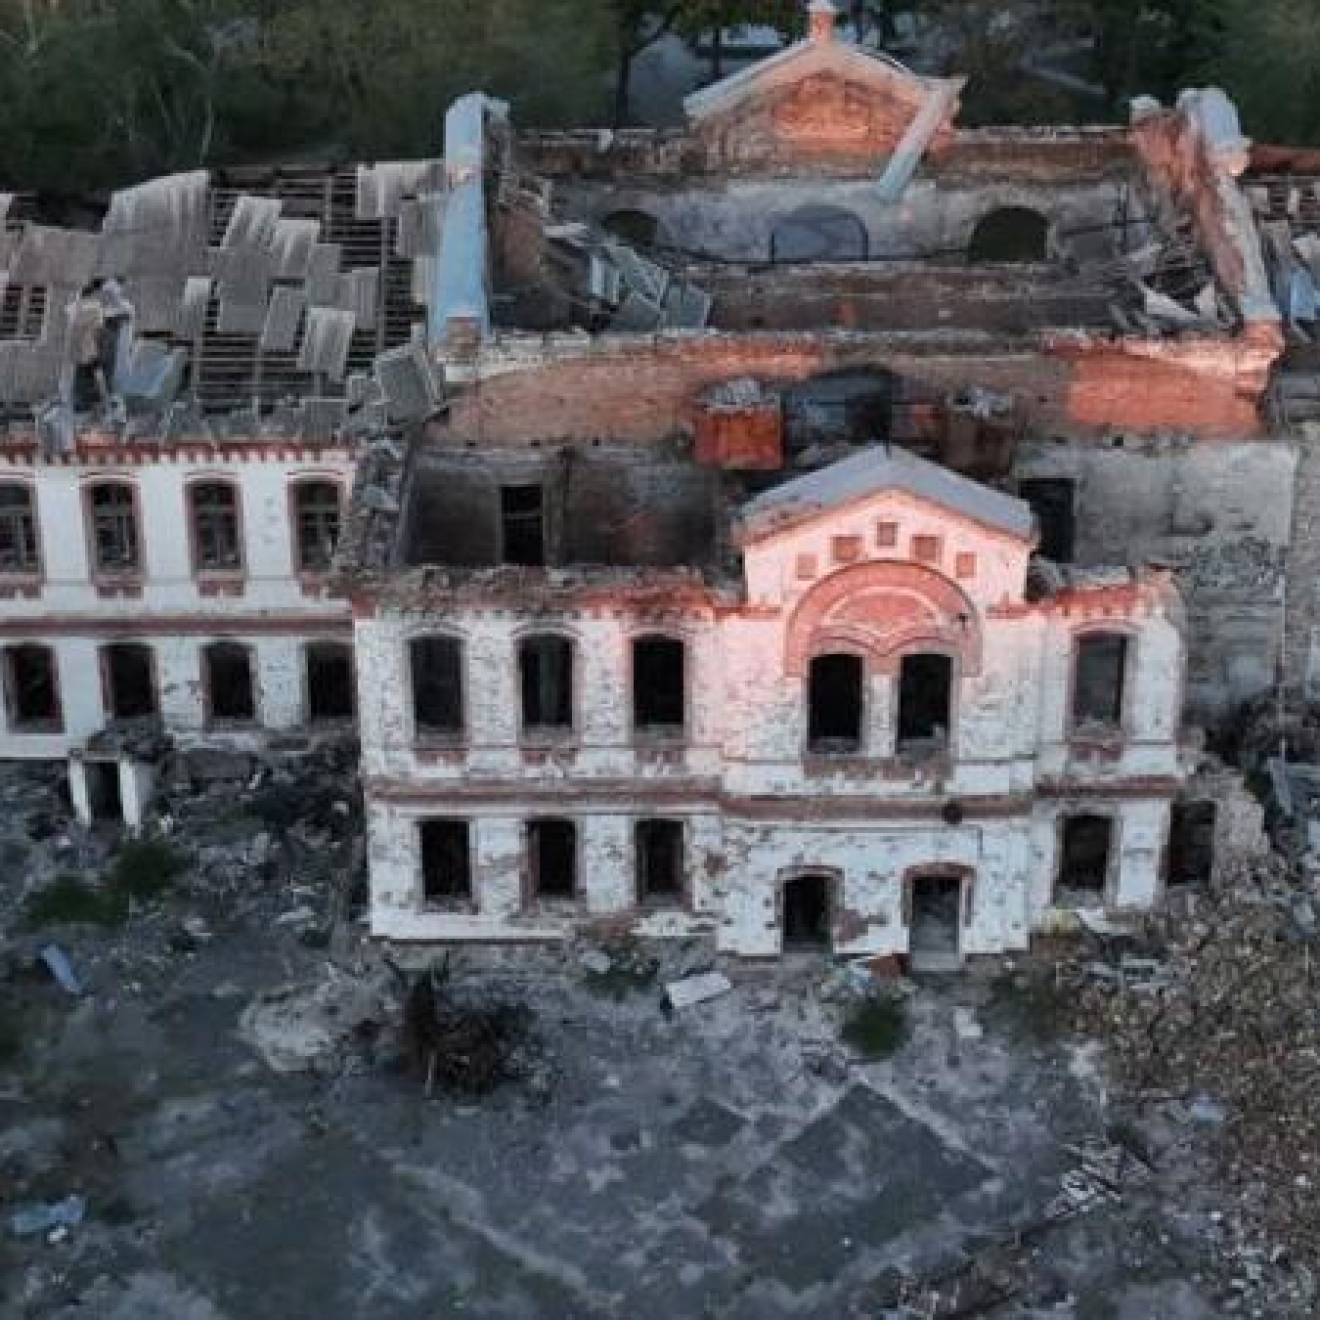 Bombed old building in Ukraine from above